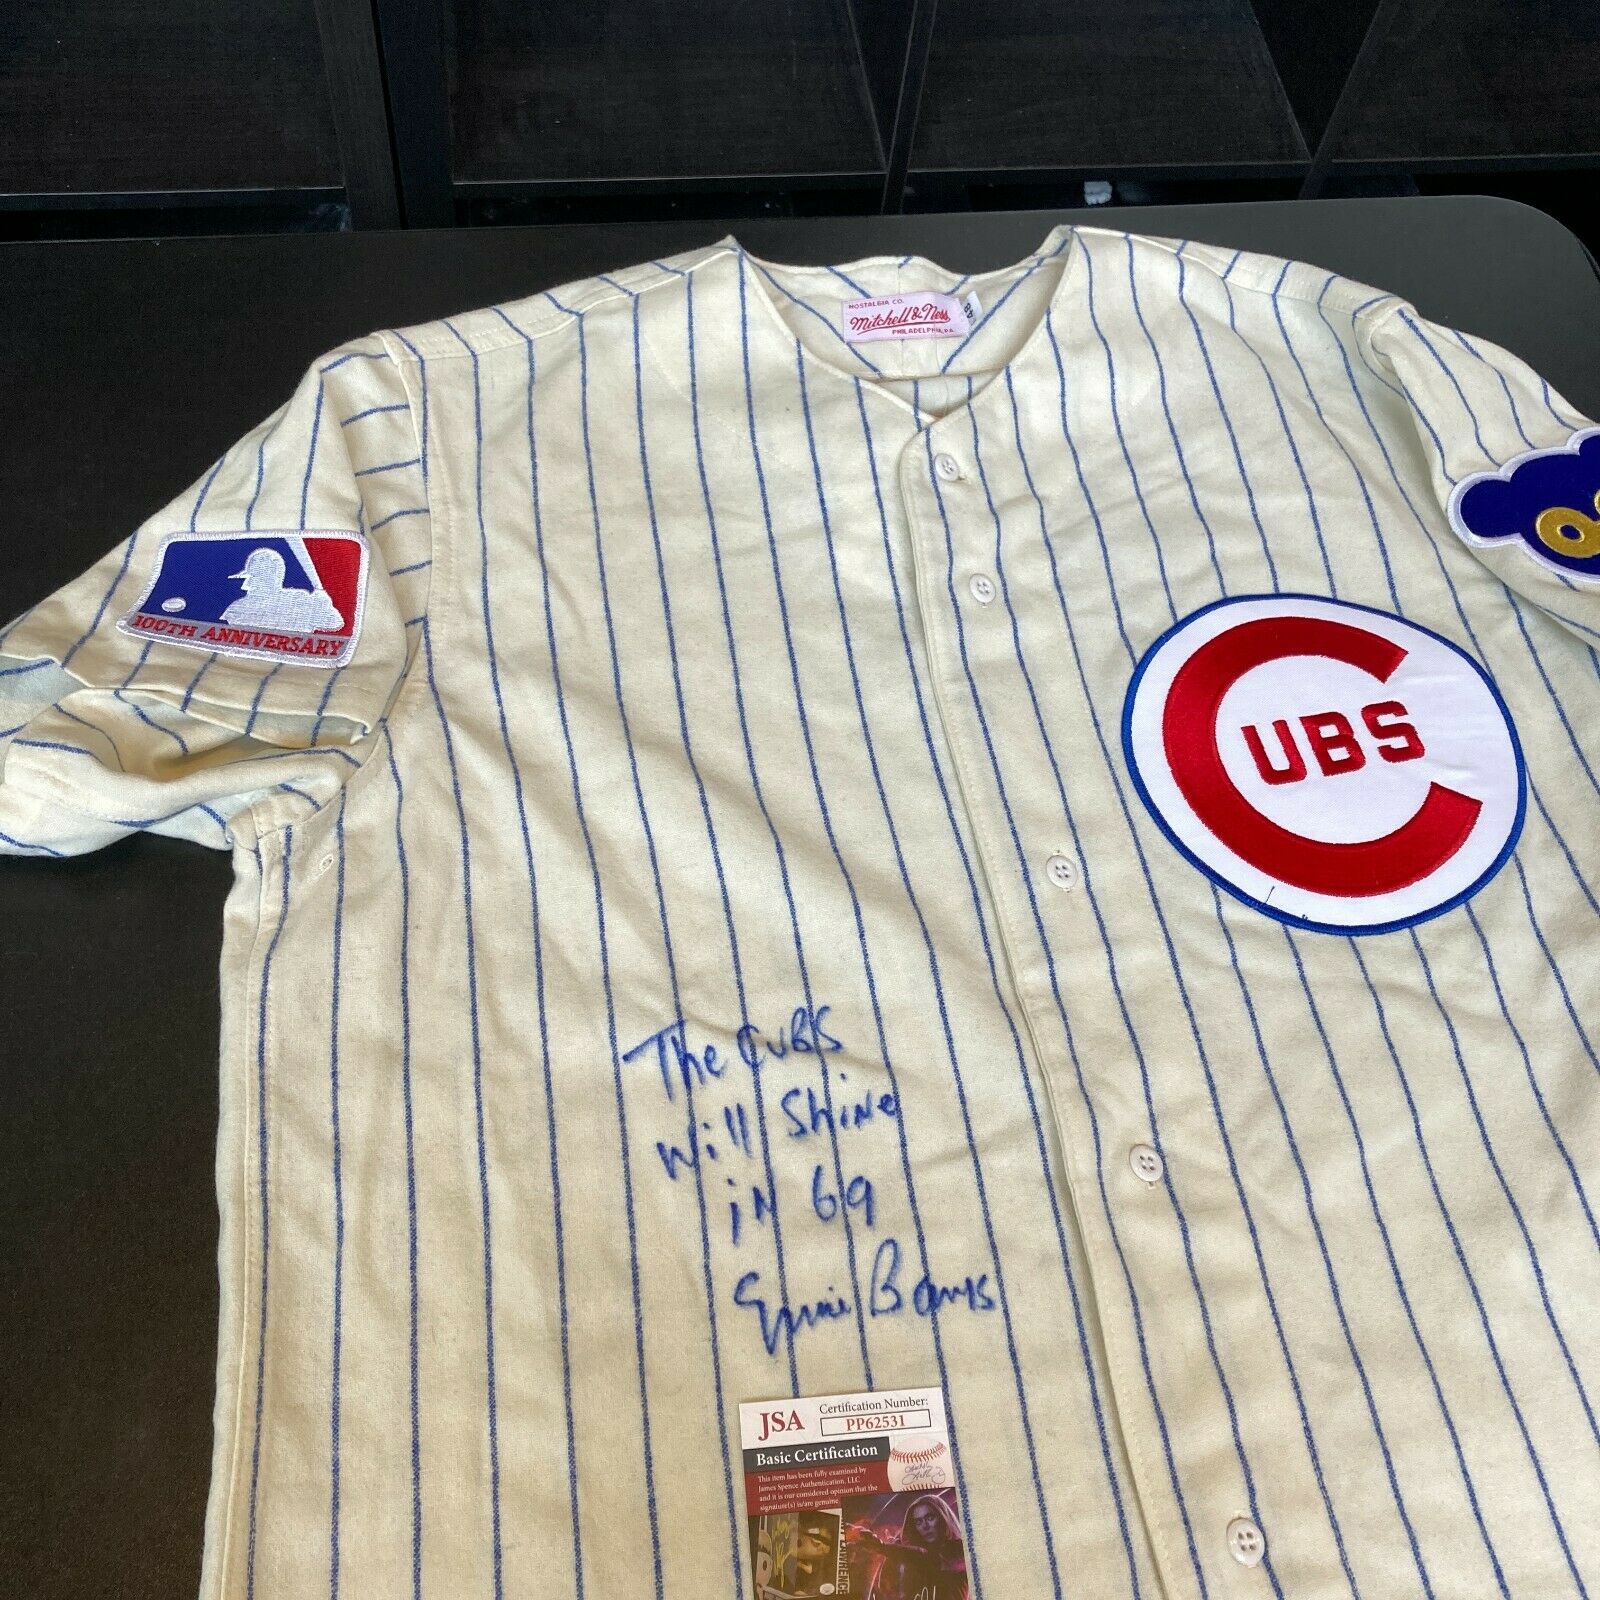 Ernie Banks The Cubs Will Shine In '69 Signed Chicago Cubs Game Jersey  JSA COA